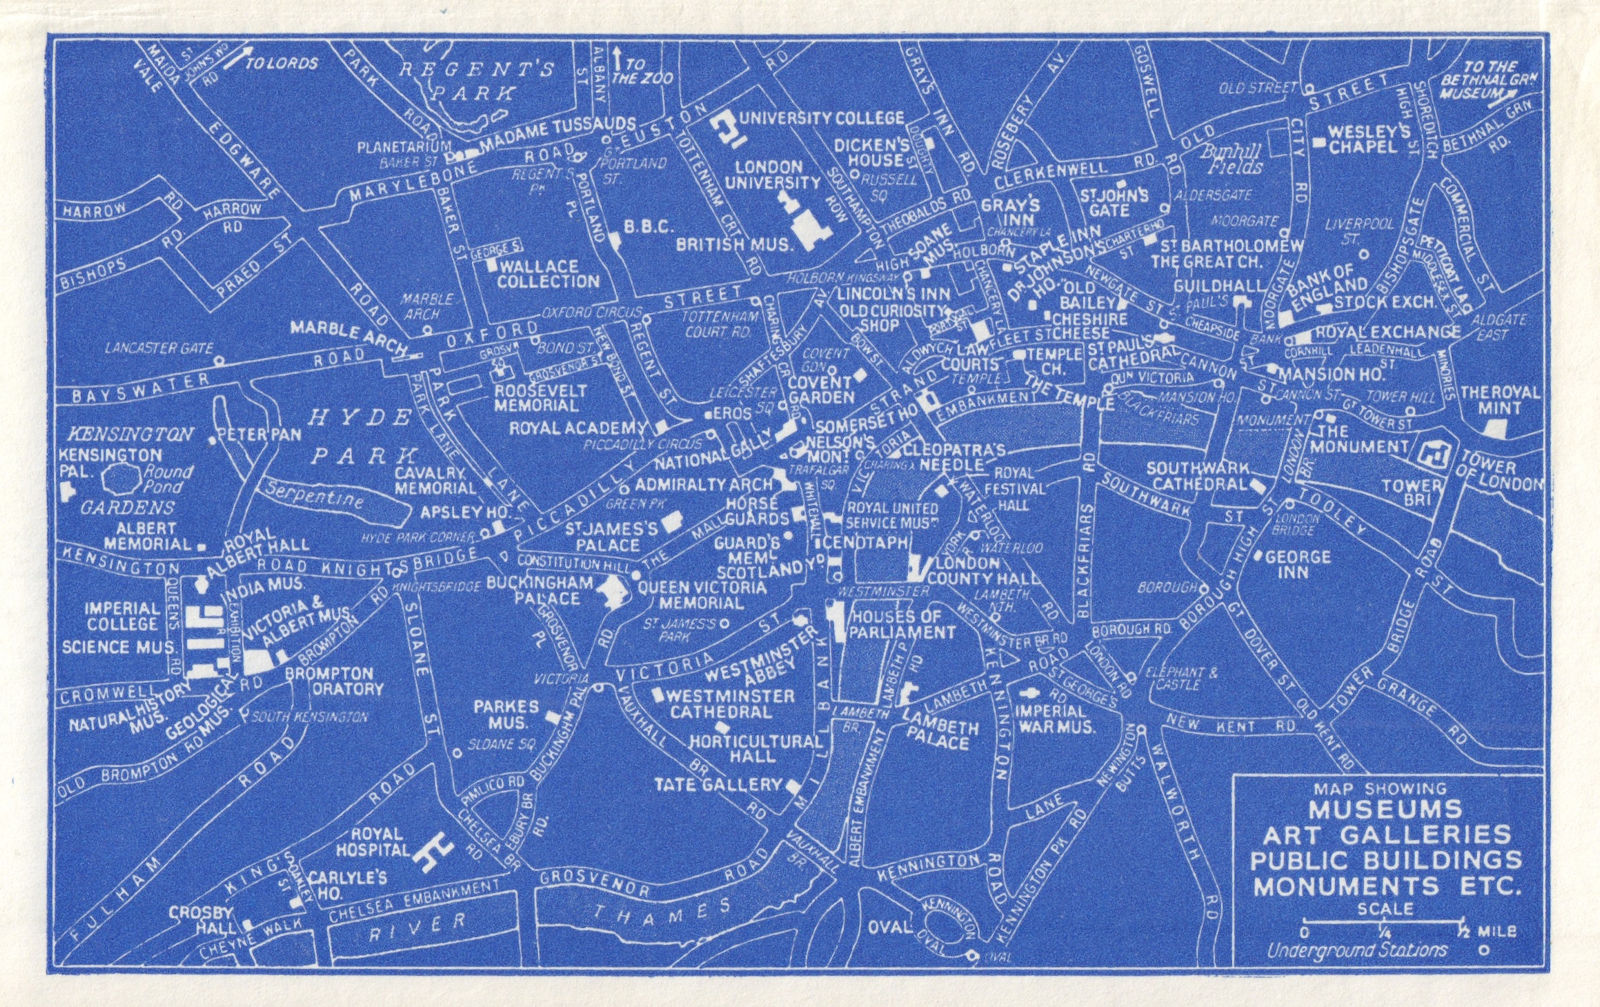 LONDON Museums Art Galleries Public Buildings Monuments attractions 1965 map